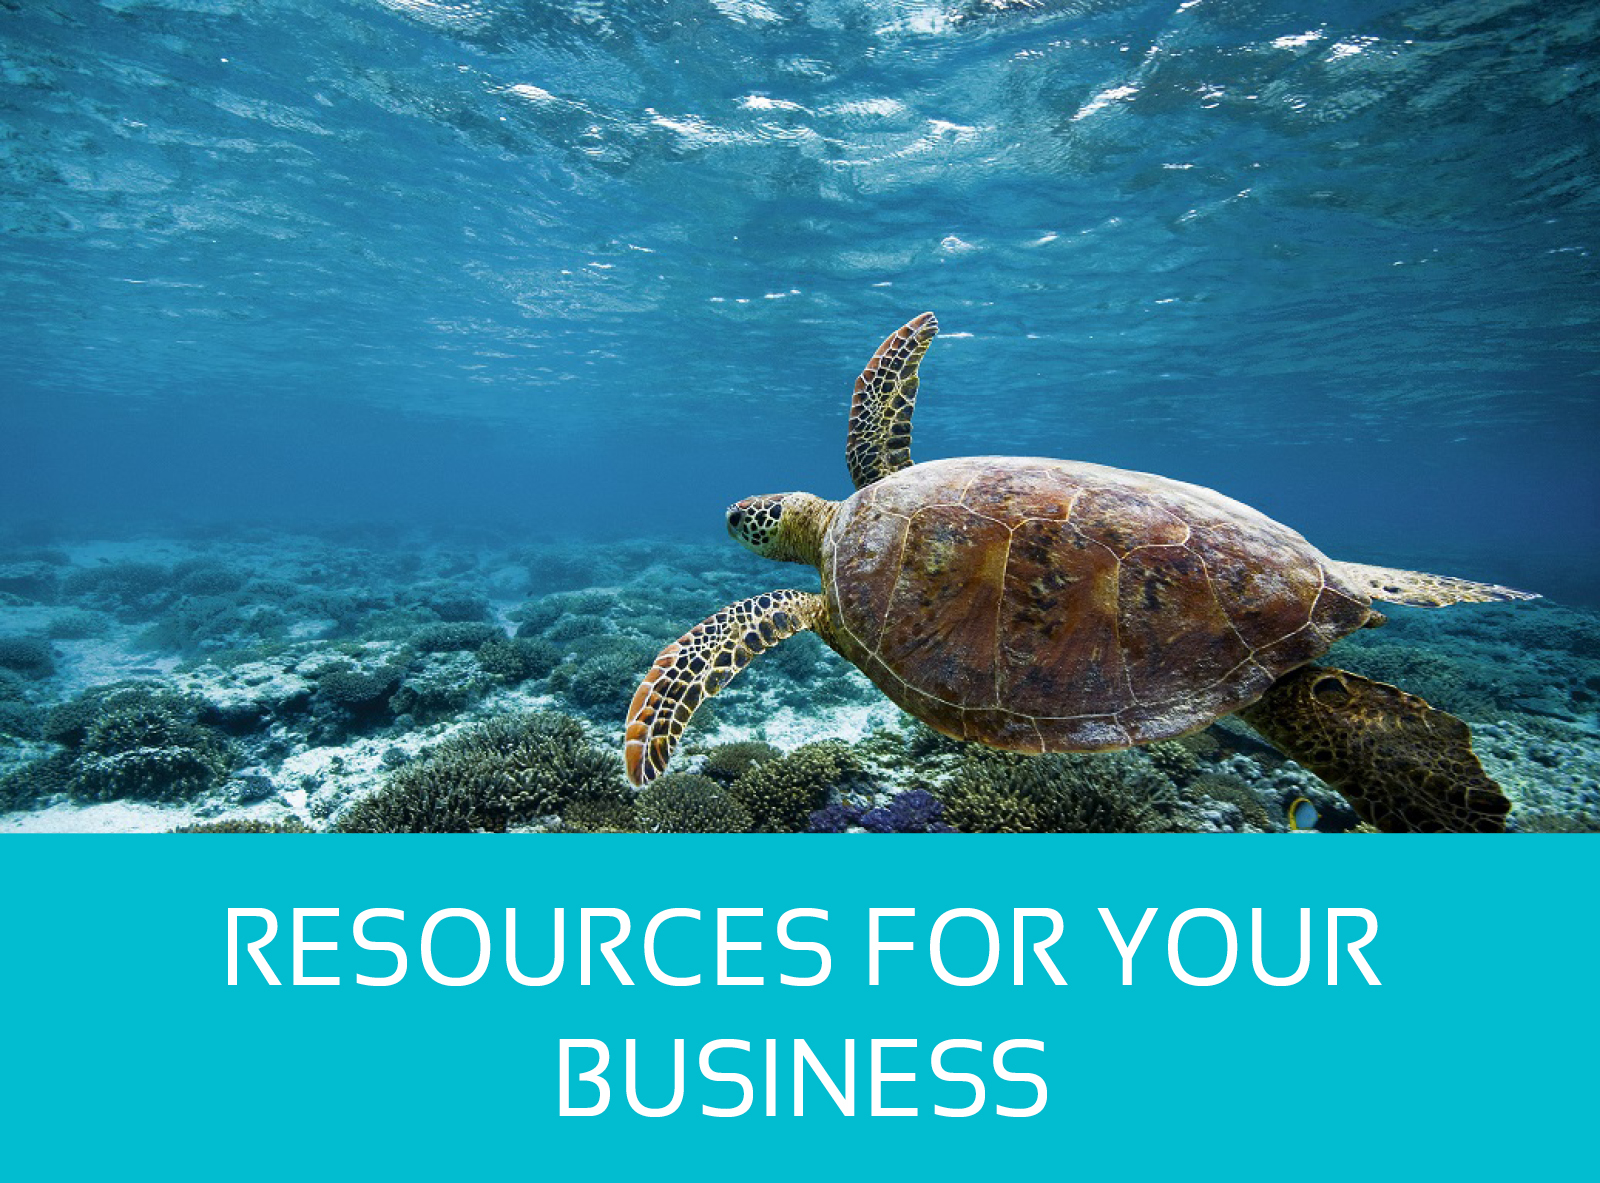 Resources for Your
Business